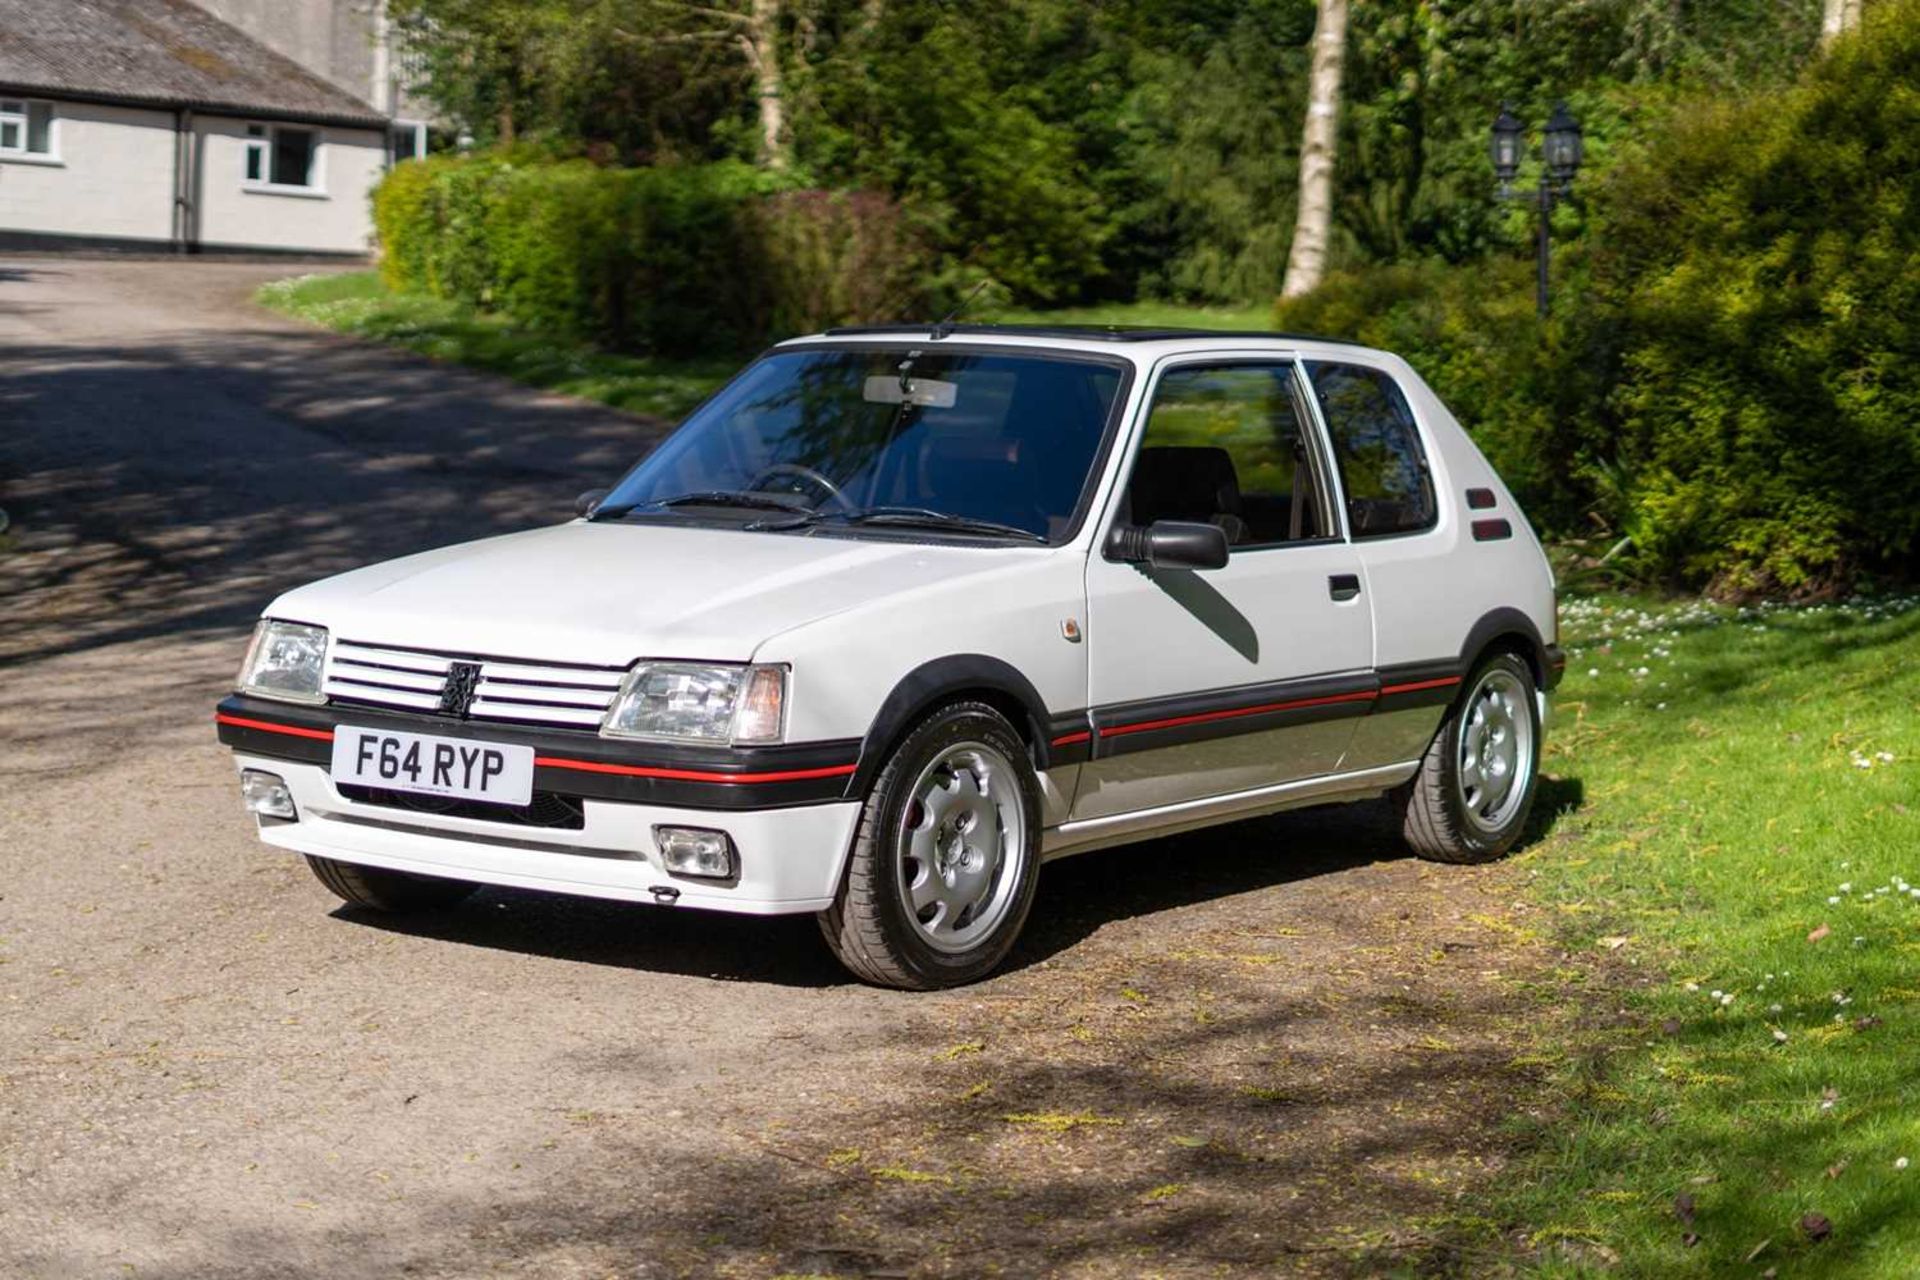 1989 Peugeot 205 GTi 1.6 The subject of much recent expenditure *** NO RESERVE *** - Image 3 of 59